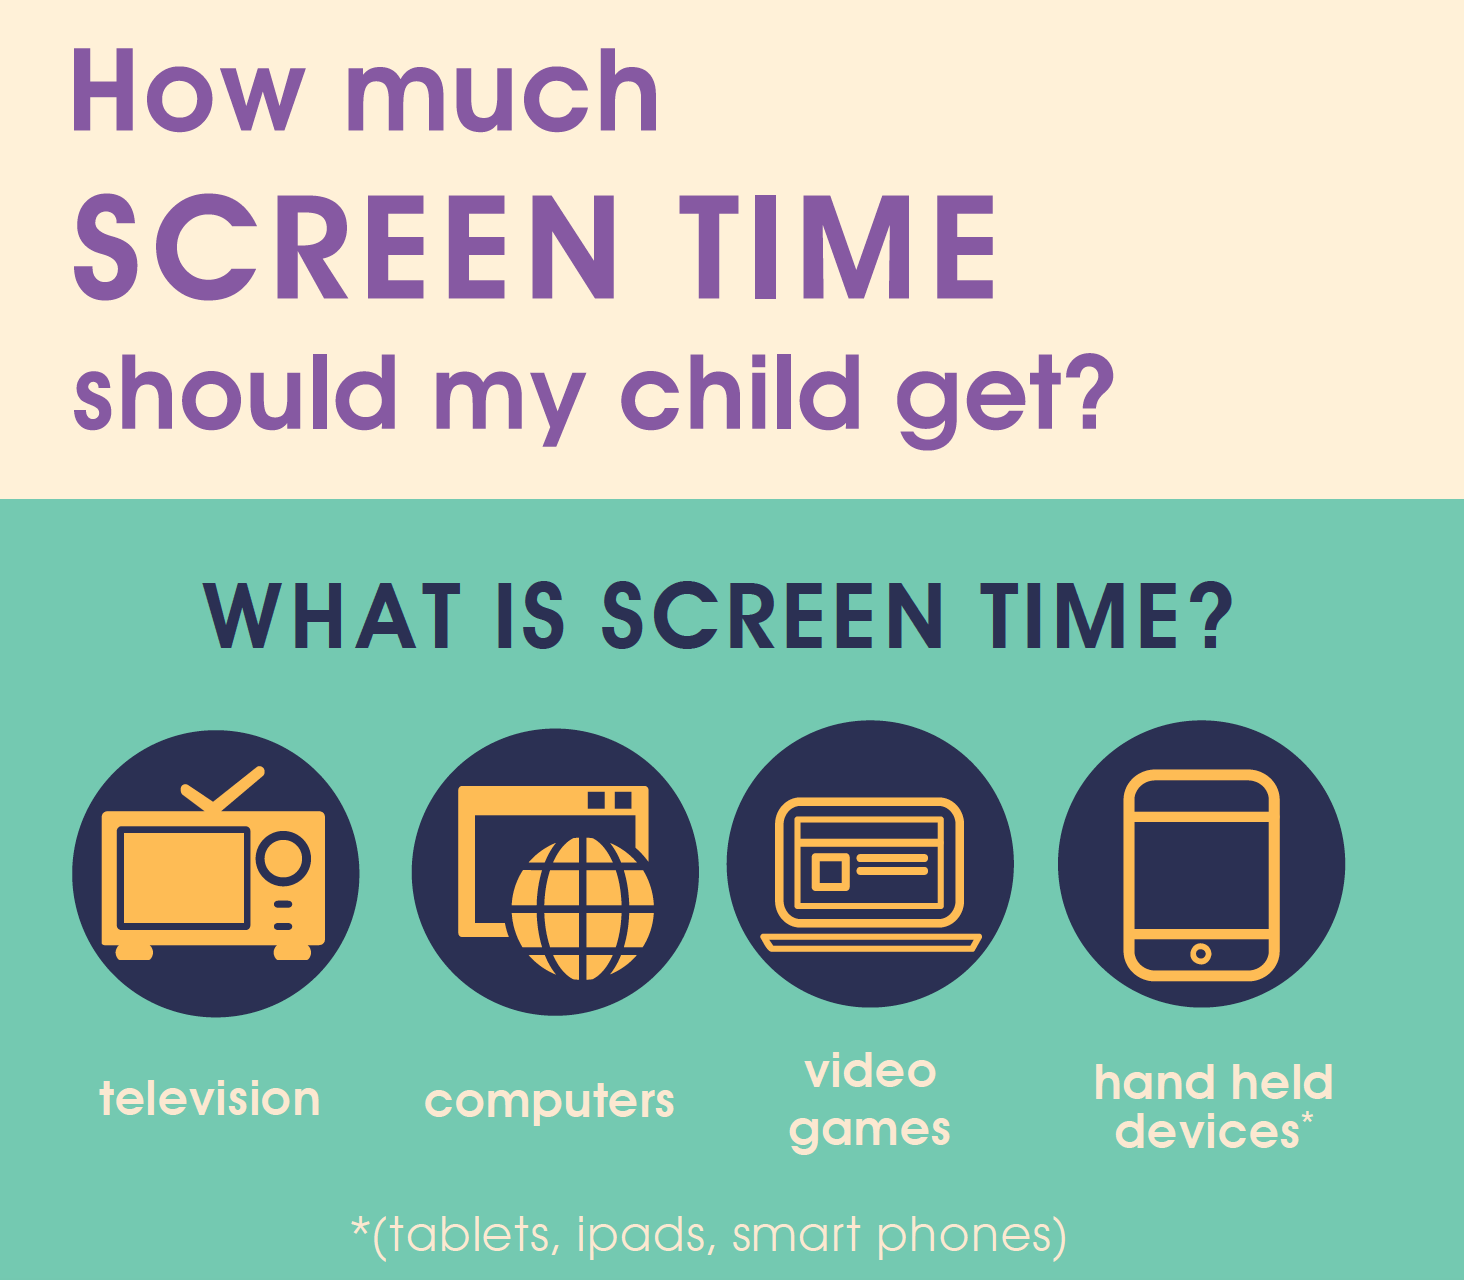 An infographic titled, "How much screen time should my child get?" It outlines screen time as television, computers, video games, and hand held devices like tablets, ipads, and smart phones).